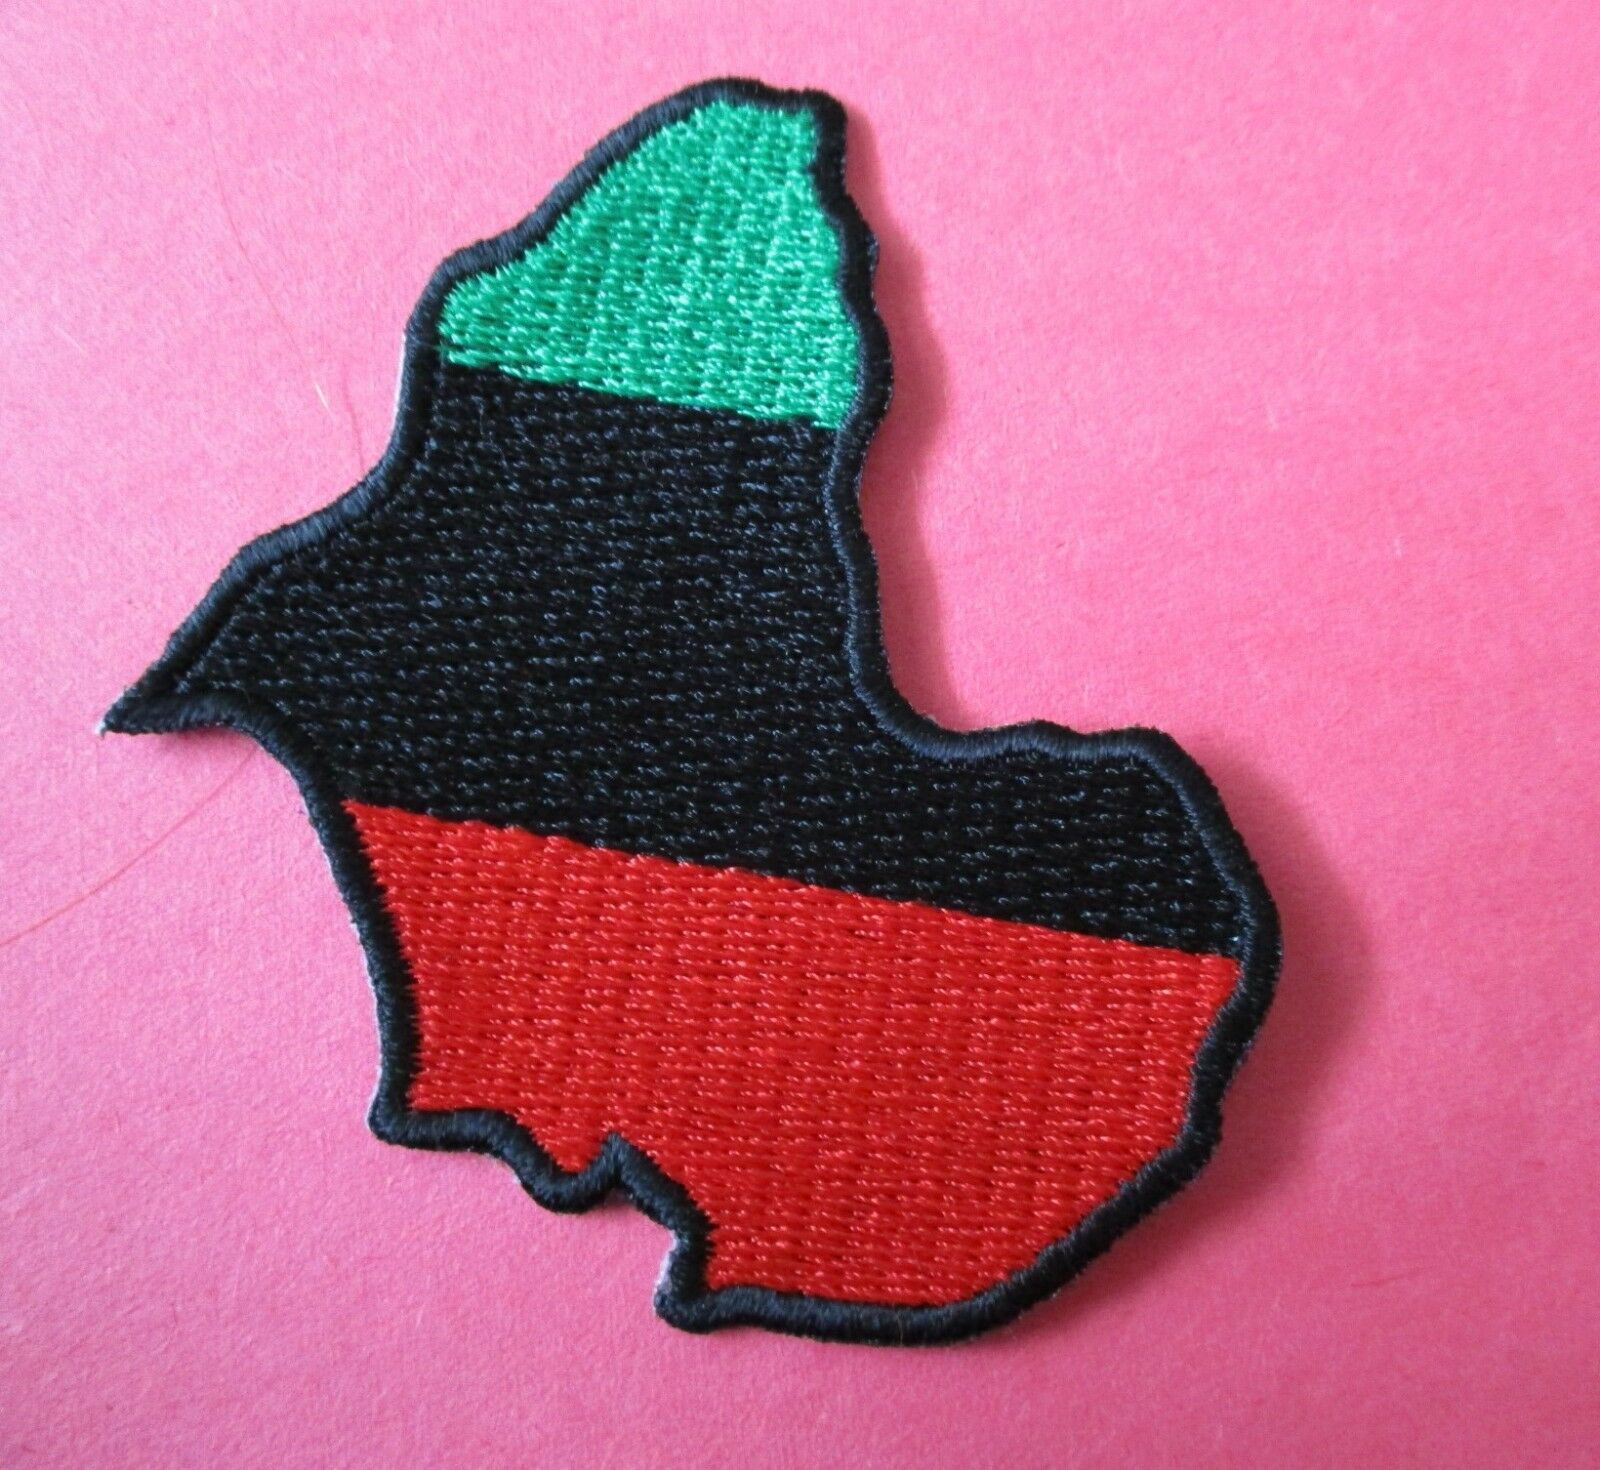 Africa (Shape of Country) - New Iron-On Patch #2